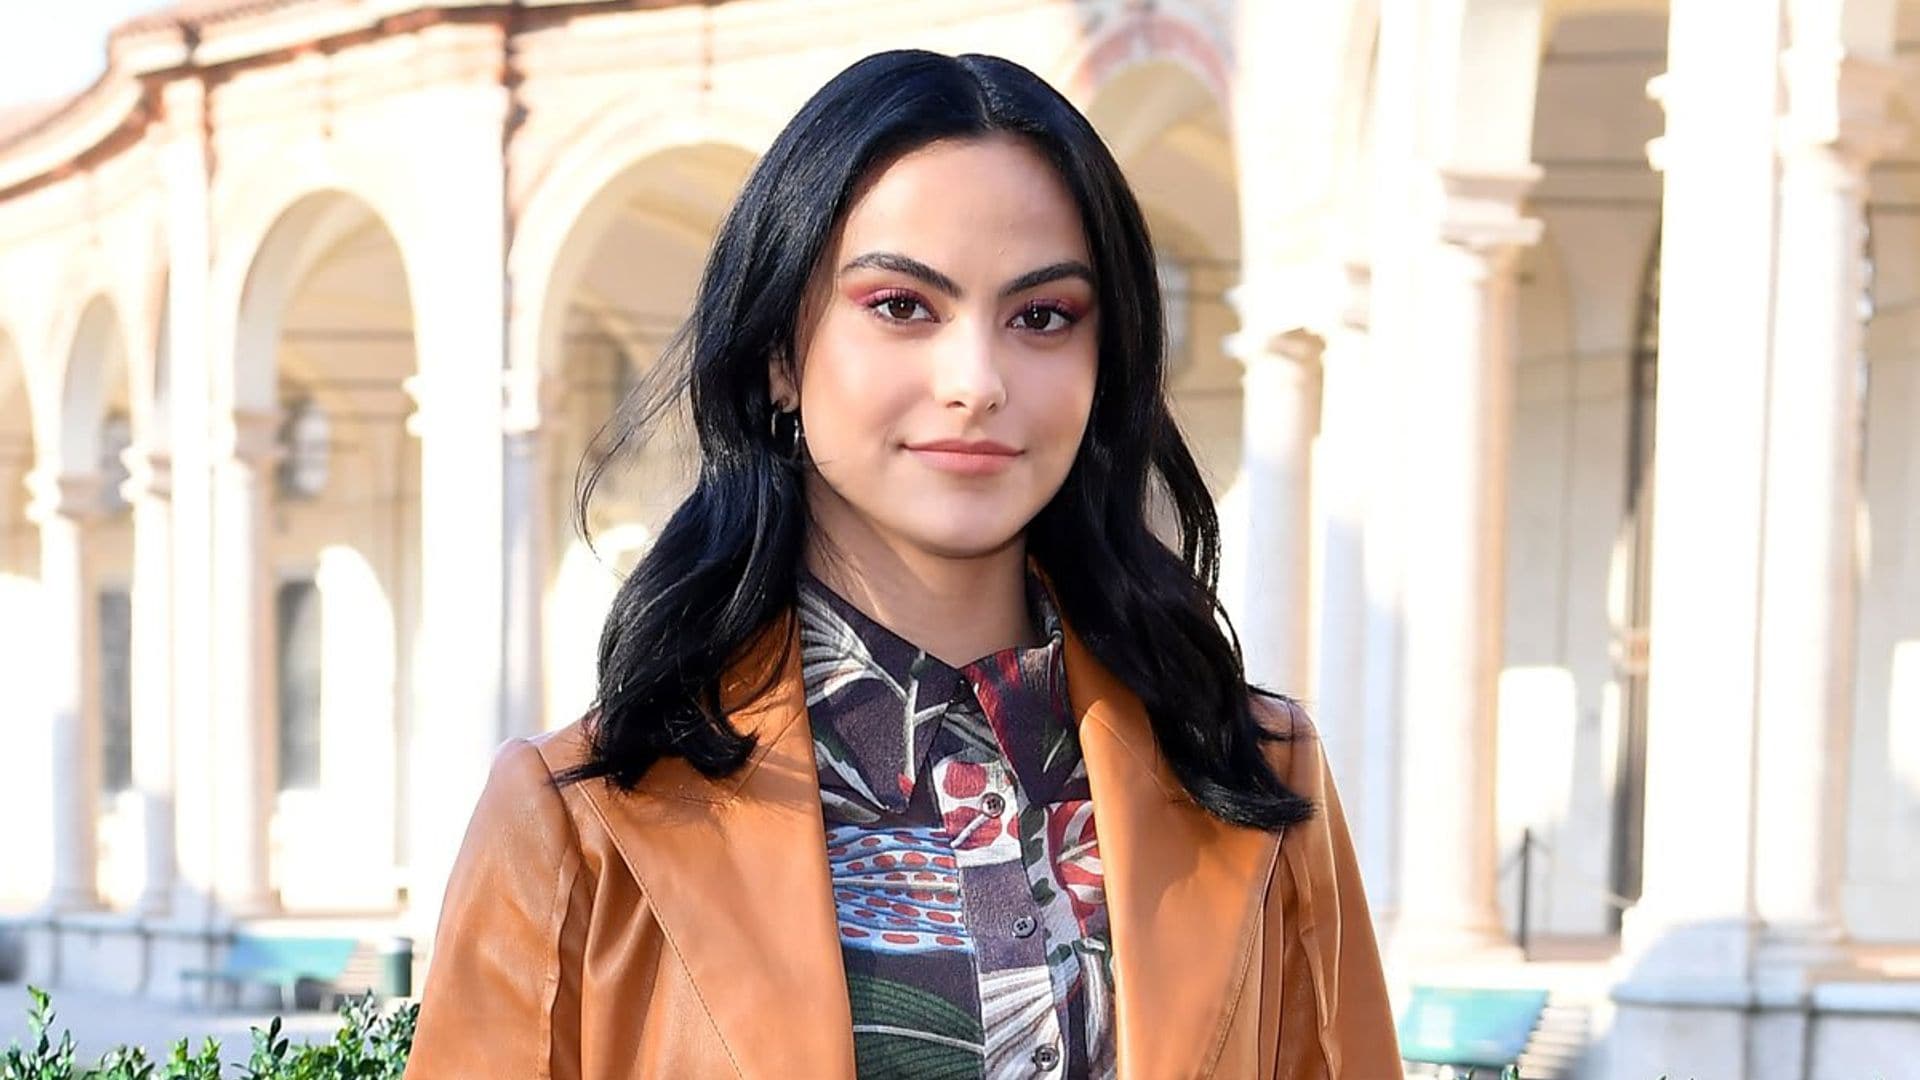 Camila Mendes is filming a new Netflix movie, ‘Strangers’ in Miami